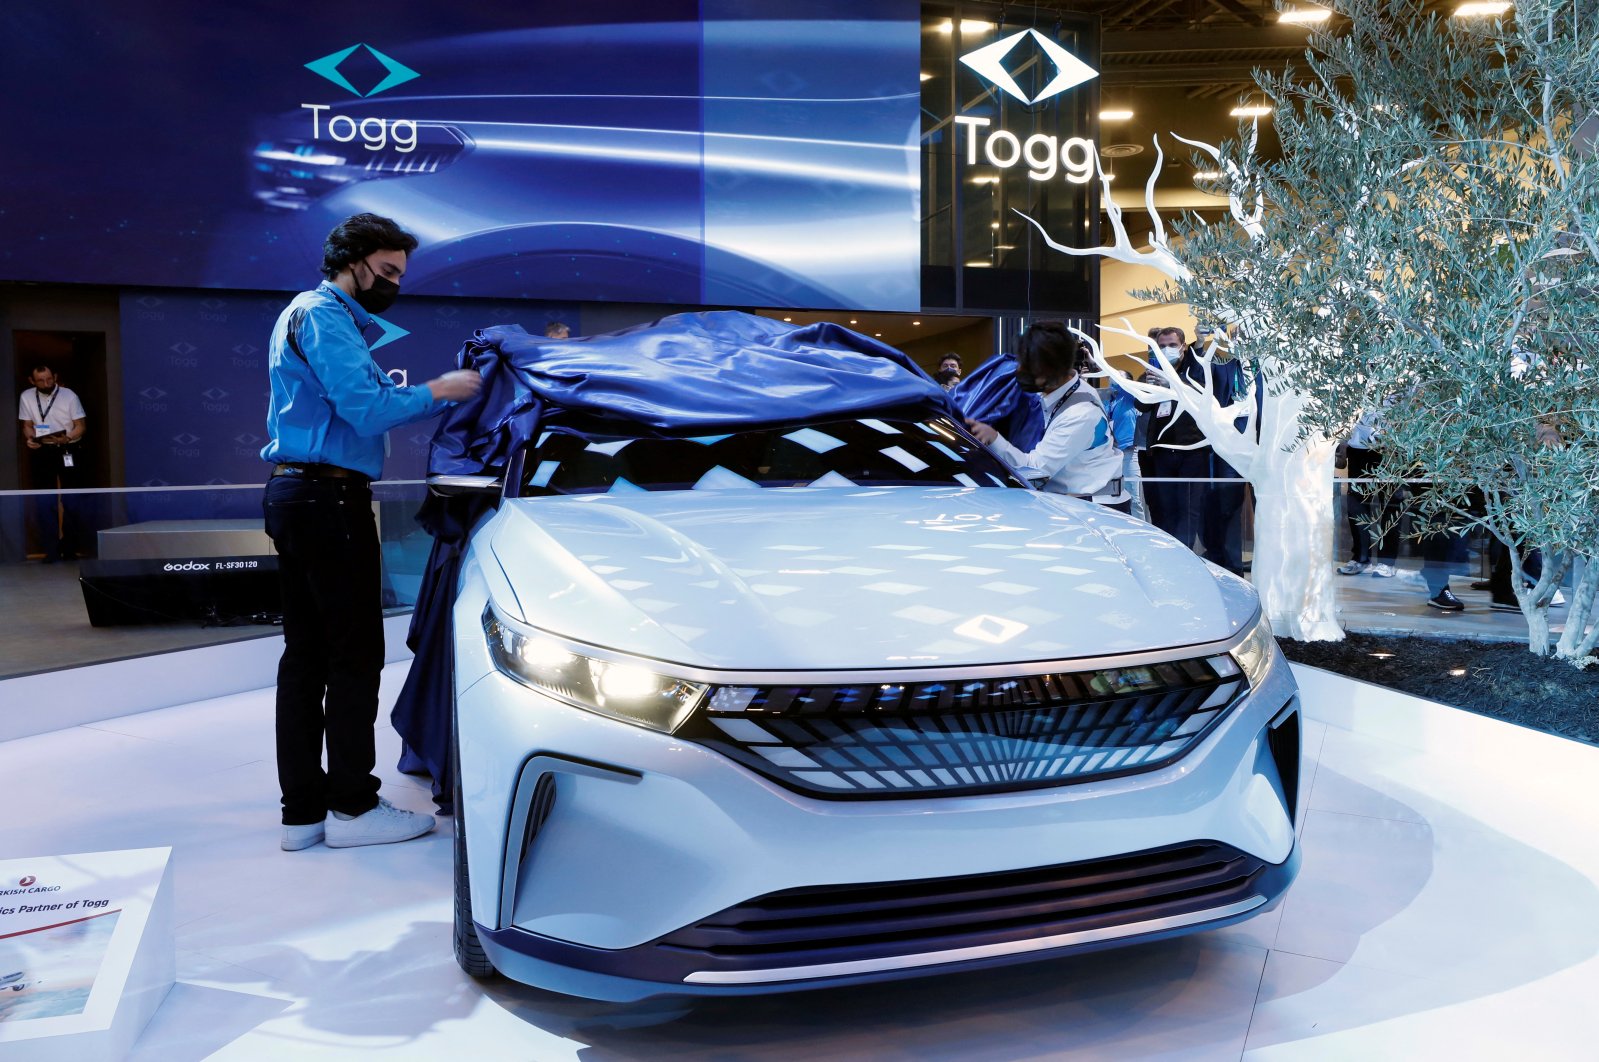 Togg&#039;s &quot;Transition Concept&quot; electric vehicle is unveiled during CES 2022 at the Las Vegas Convention Center in Las Vegas, Nevada, U.S., Jan. 5, 2022. (Reuters Photo)